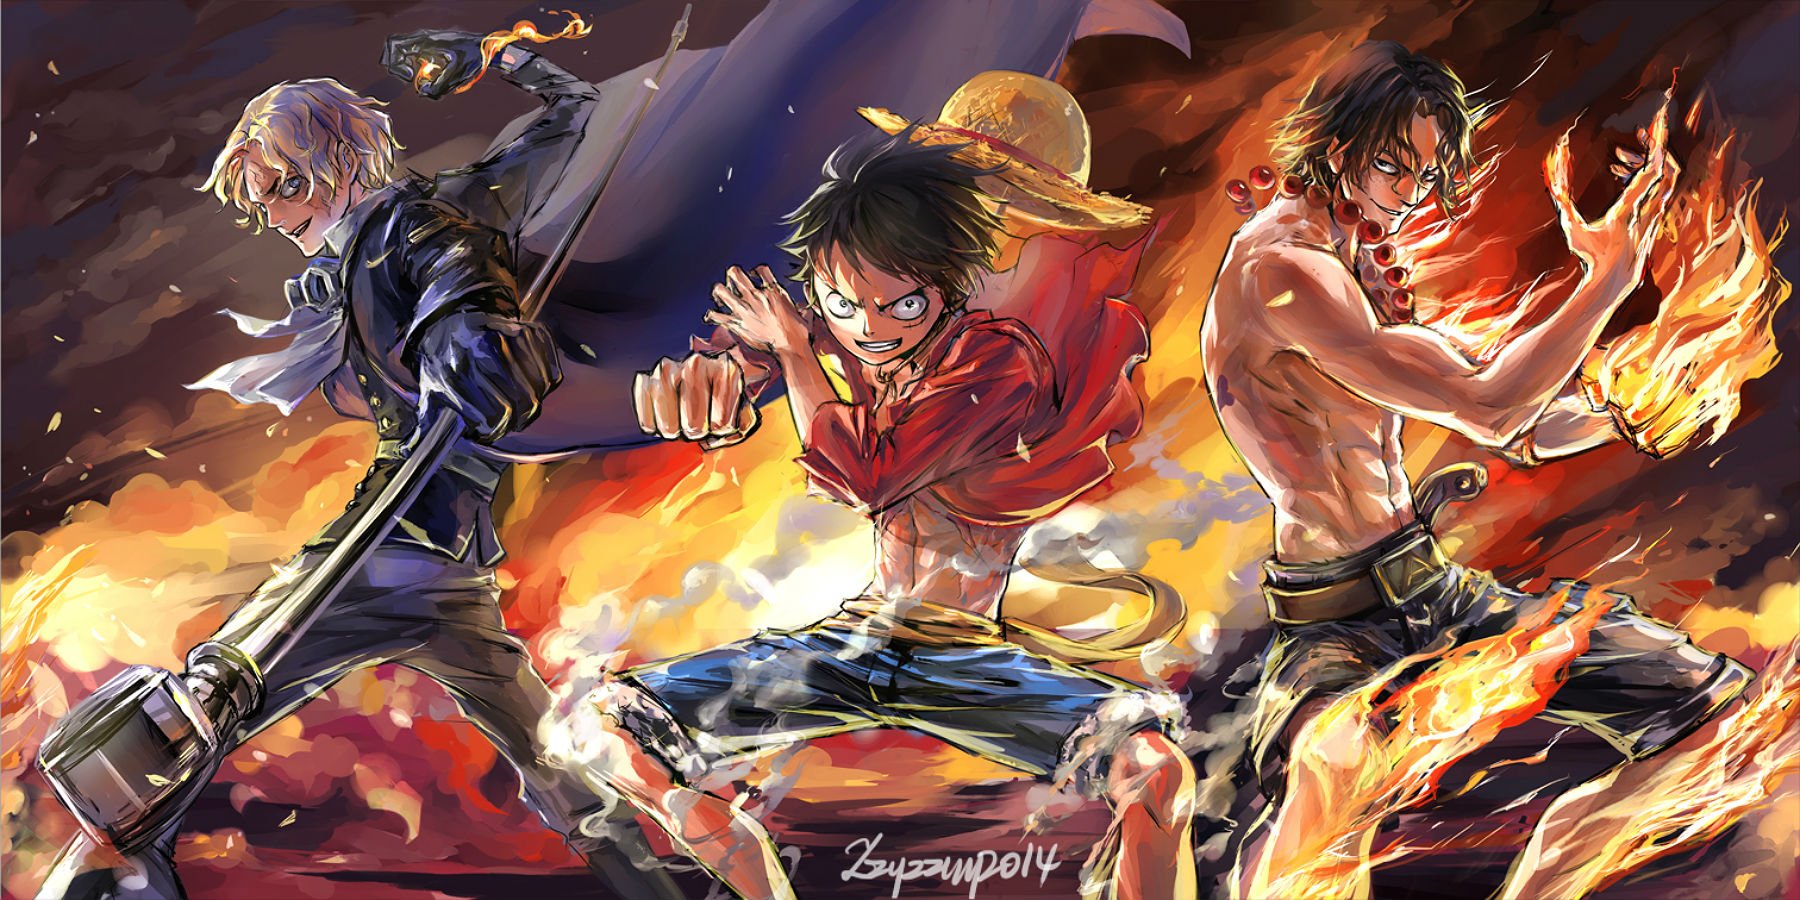 Flame Monkey D Luffy One Piece Portgas D Ace Sabo One Piece 1800x900